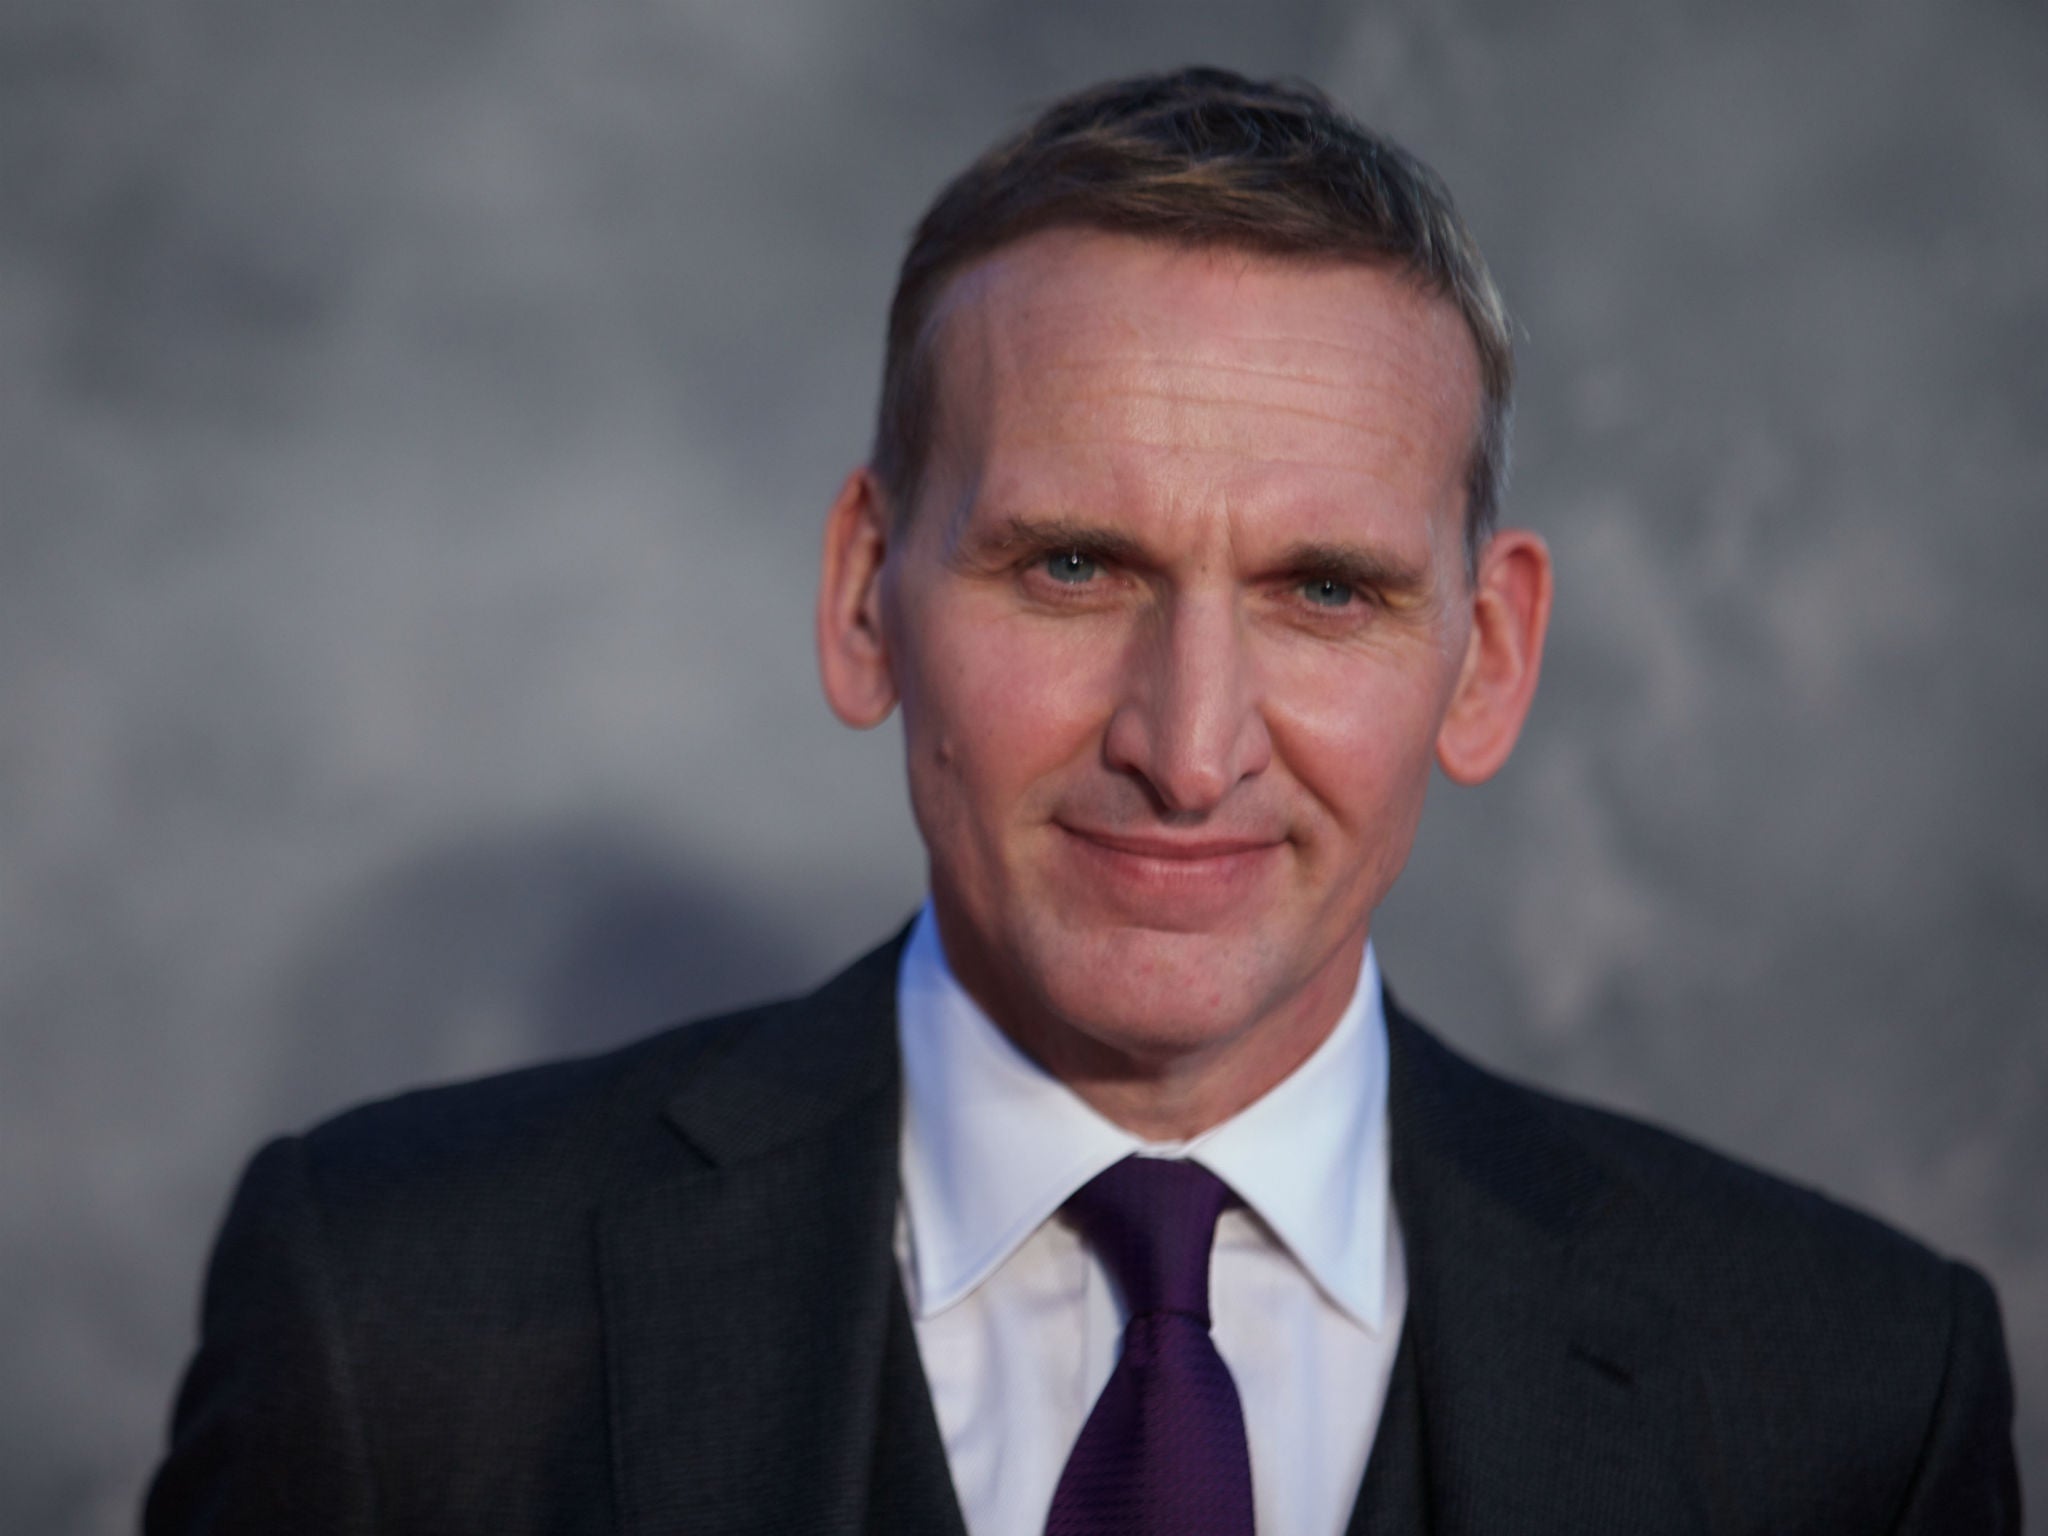 Actor Christopher Eccleston has repeatedly spoken out against social inequality in acting